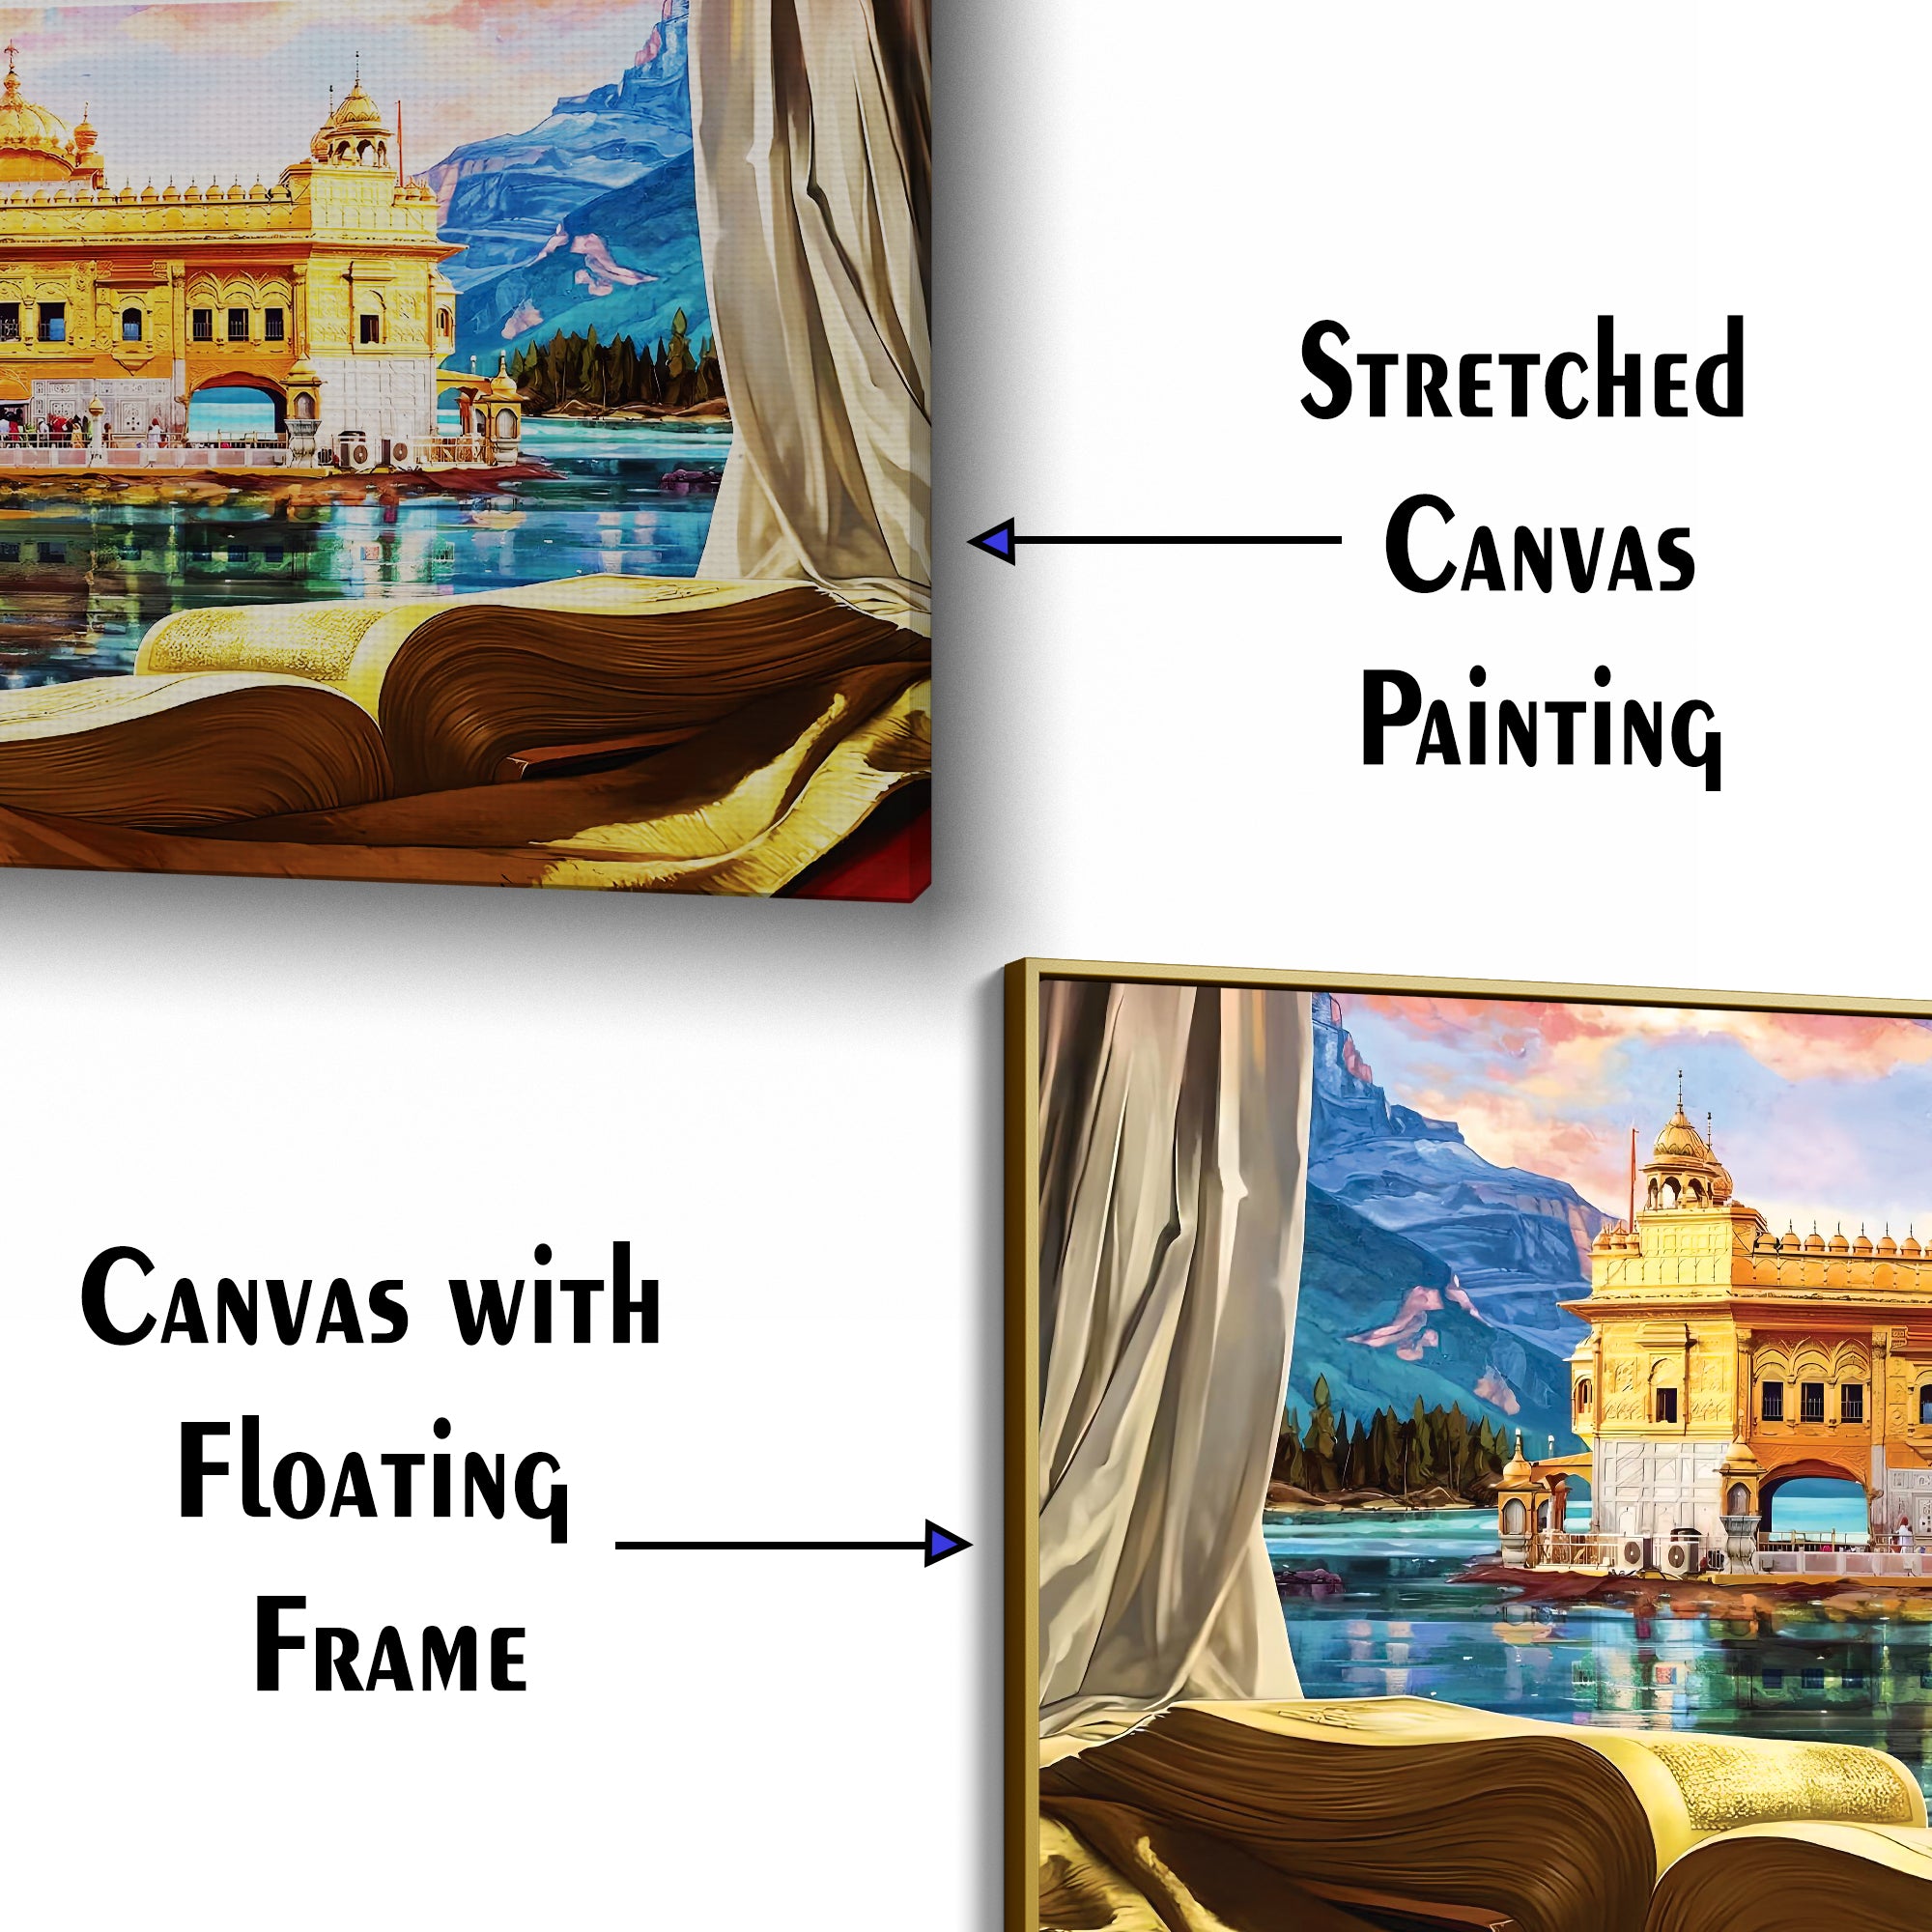 Abstract Golden Temple Canvas Wall Painting